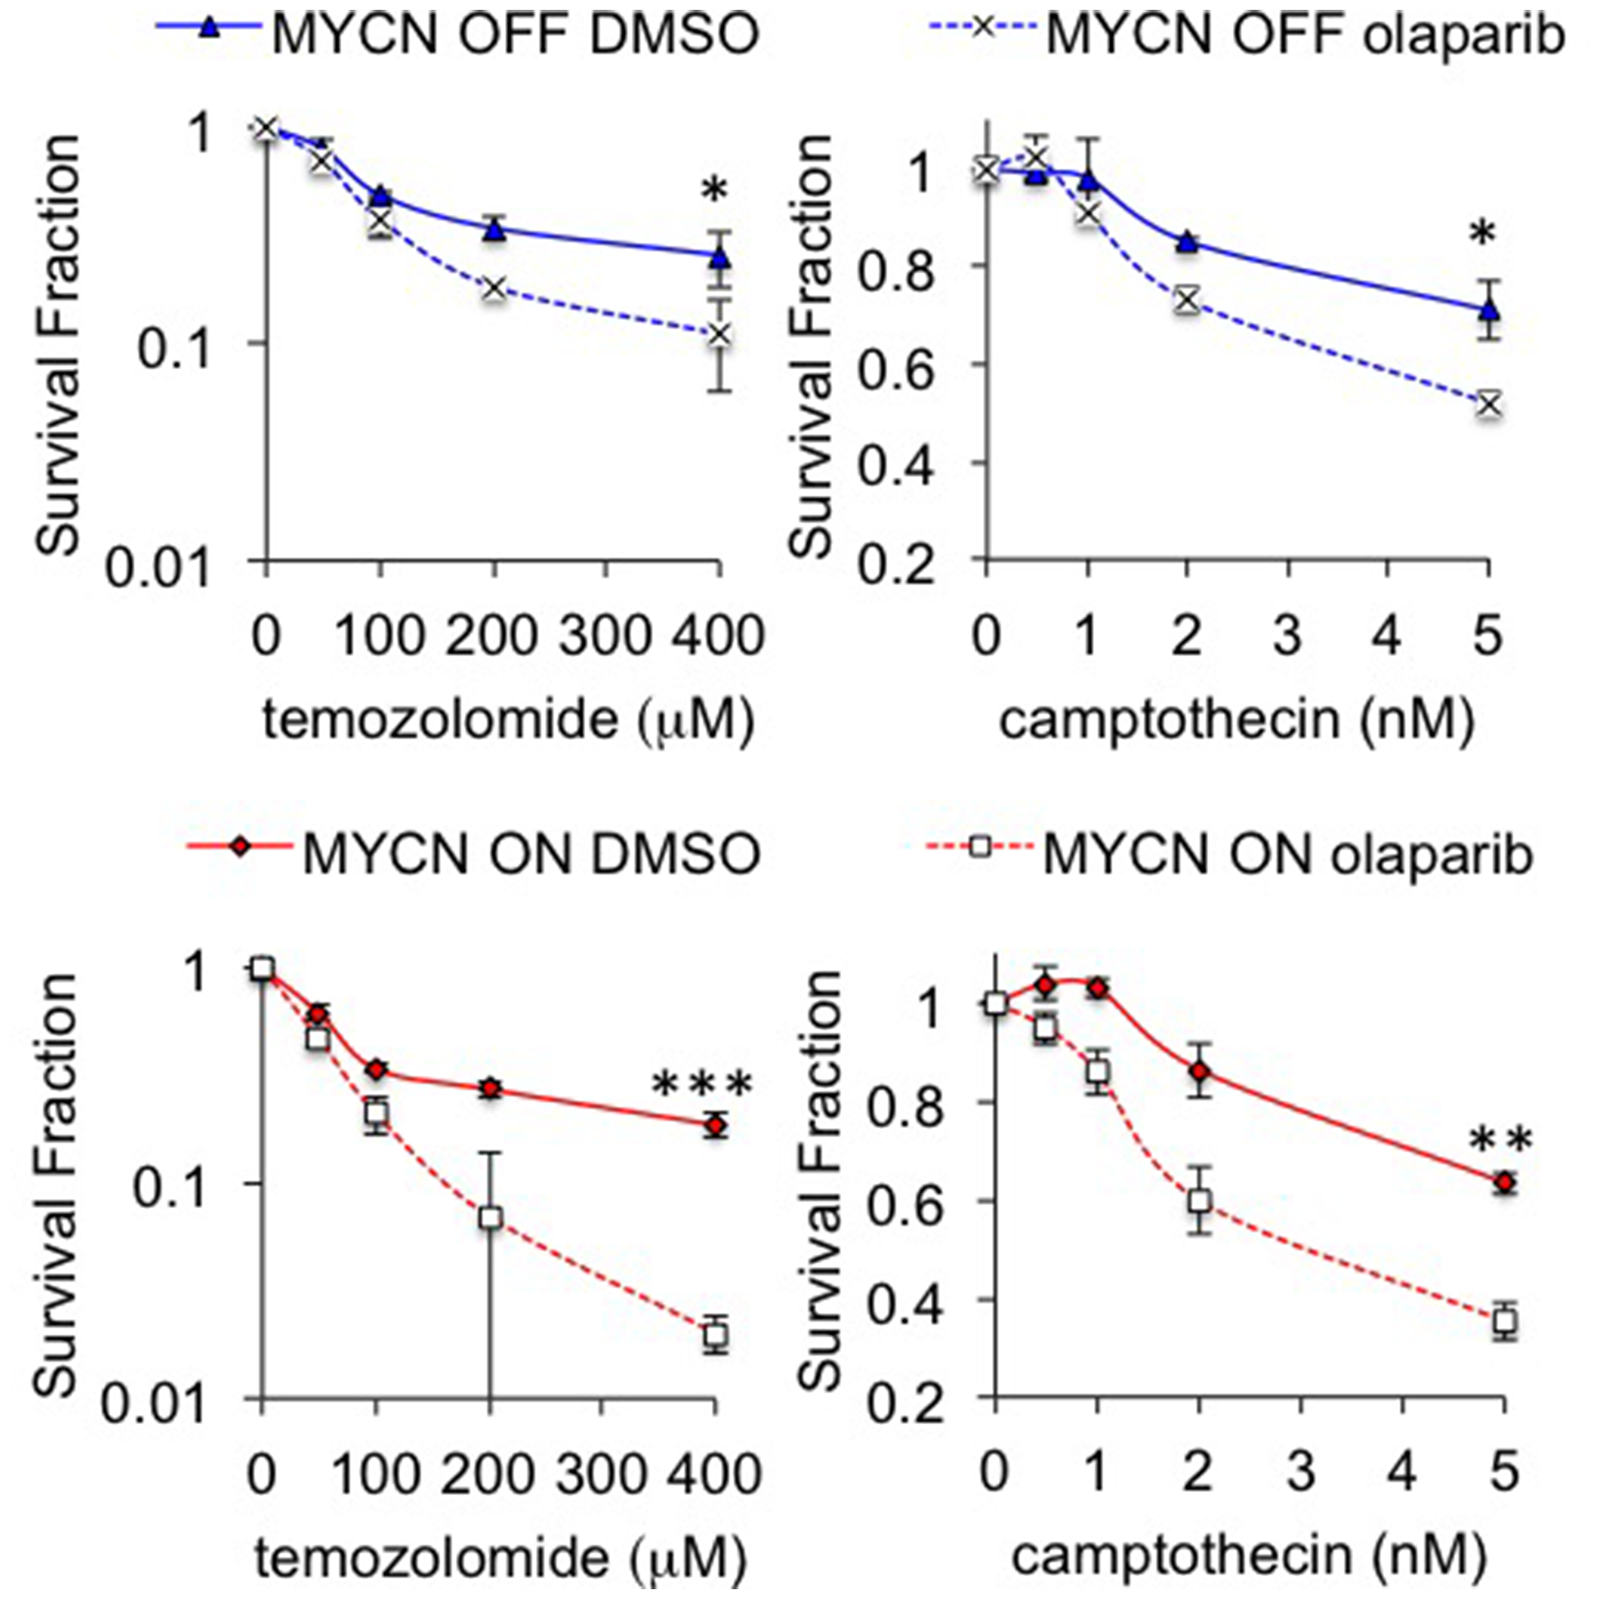 Inhibition of PARP sensitizes NB cells to camptothecin and temozolomide.